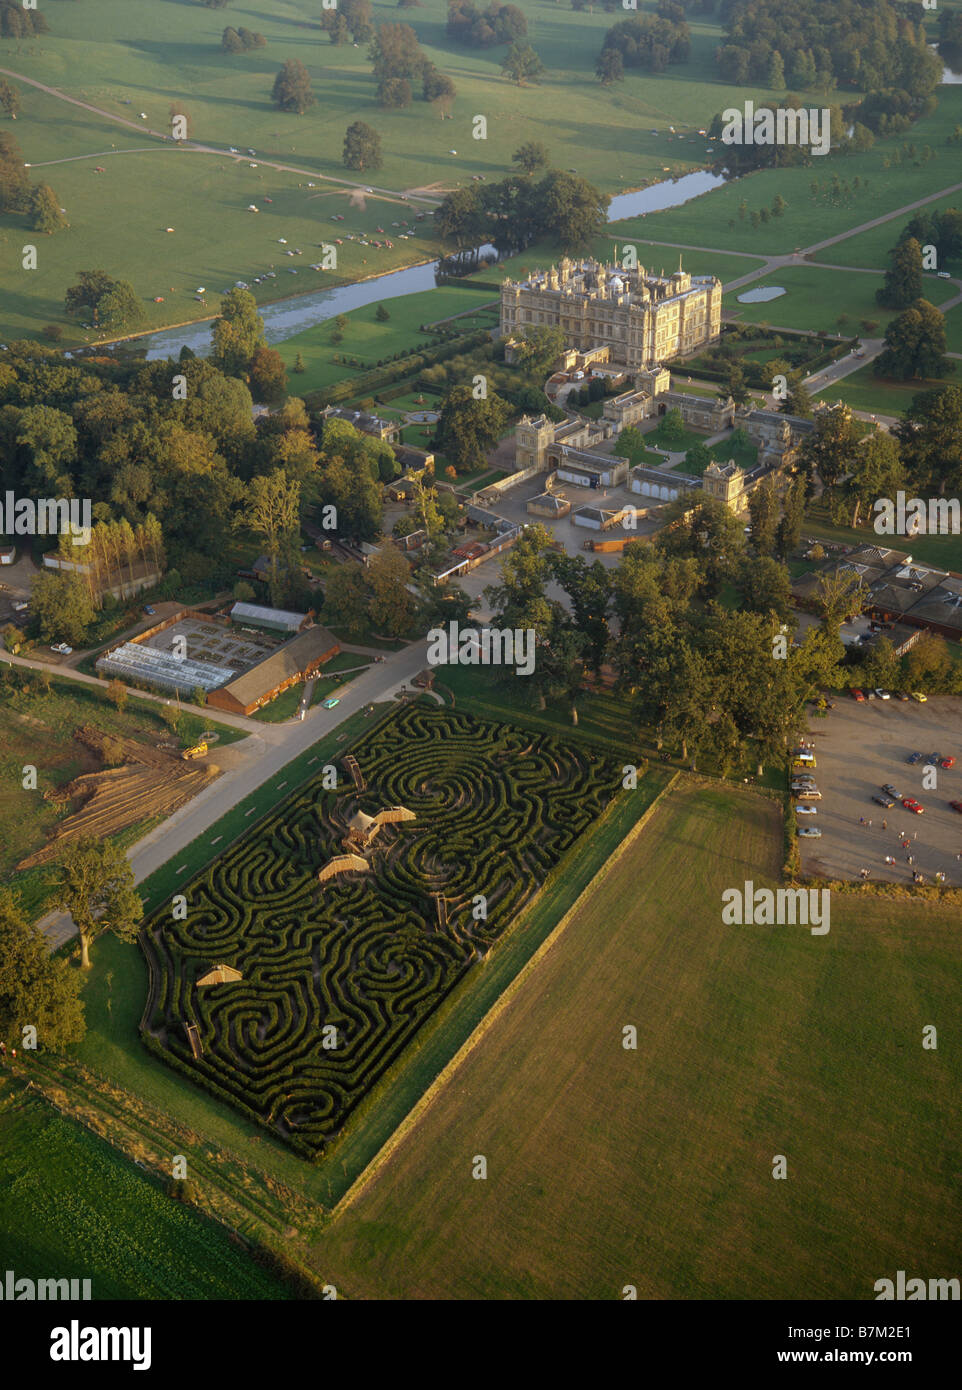 Longleat House Wiltshire built by Sir John Thynne completed 1580 Aerial view of Maze Stock Photo